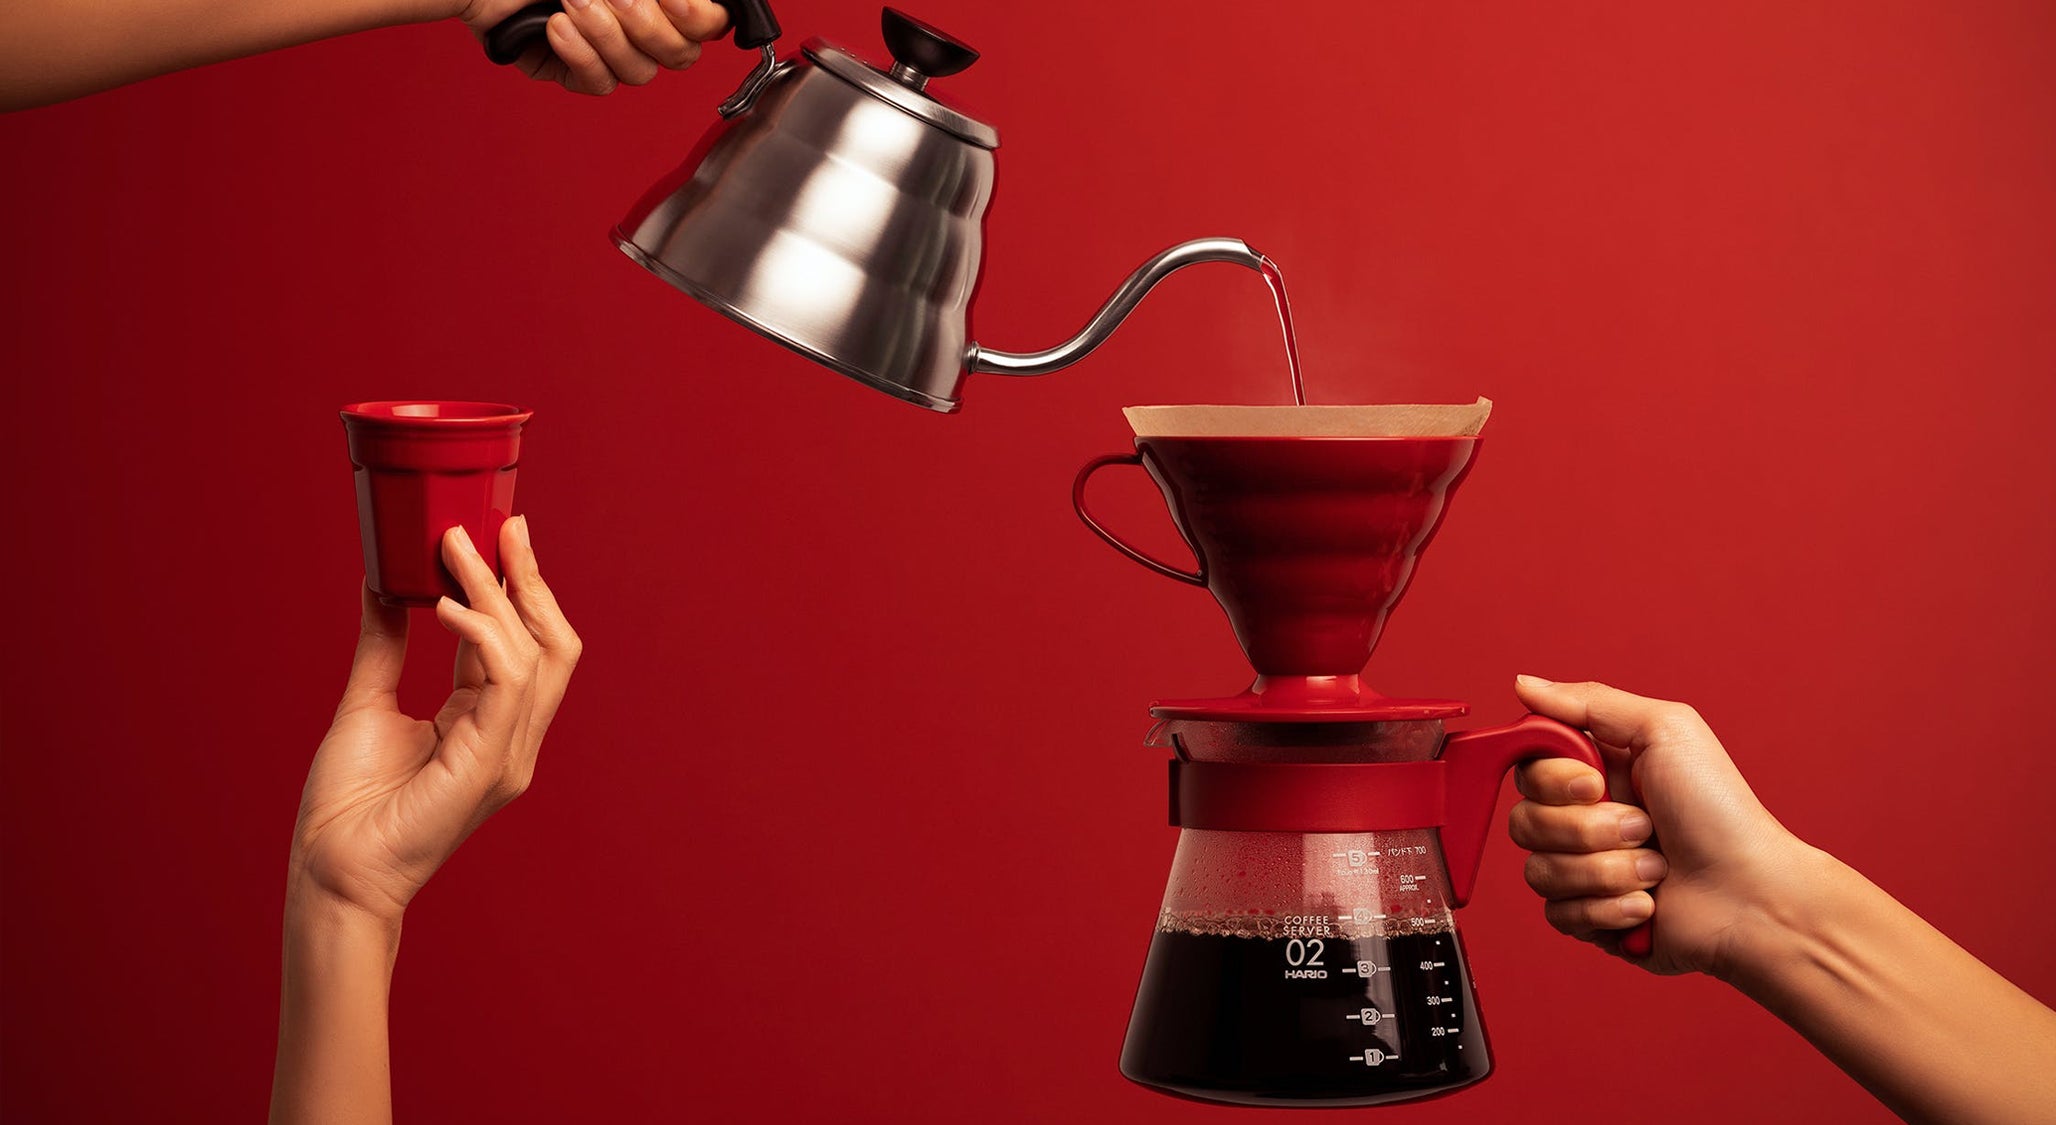 Pour over image